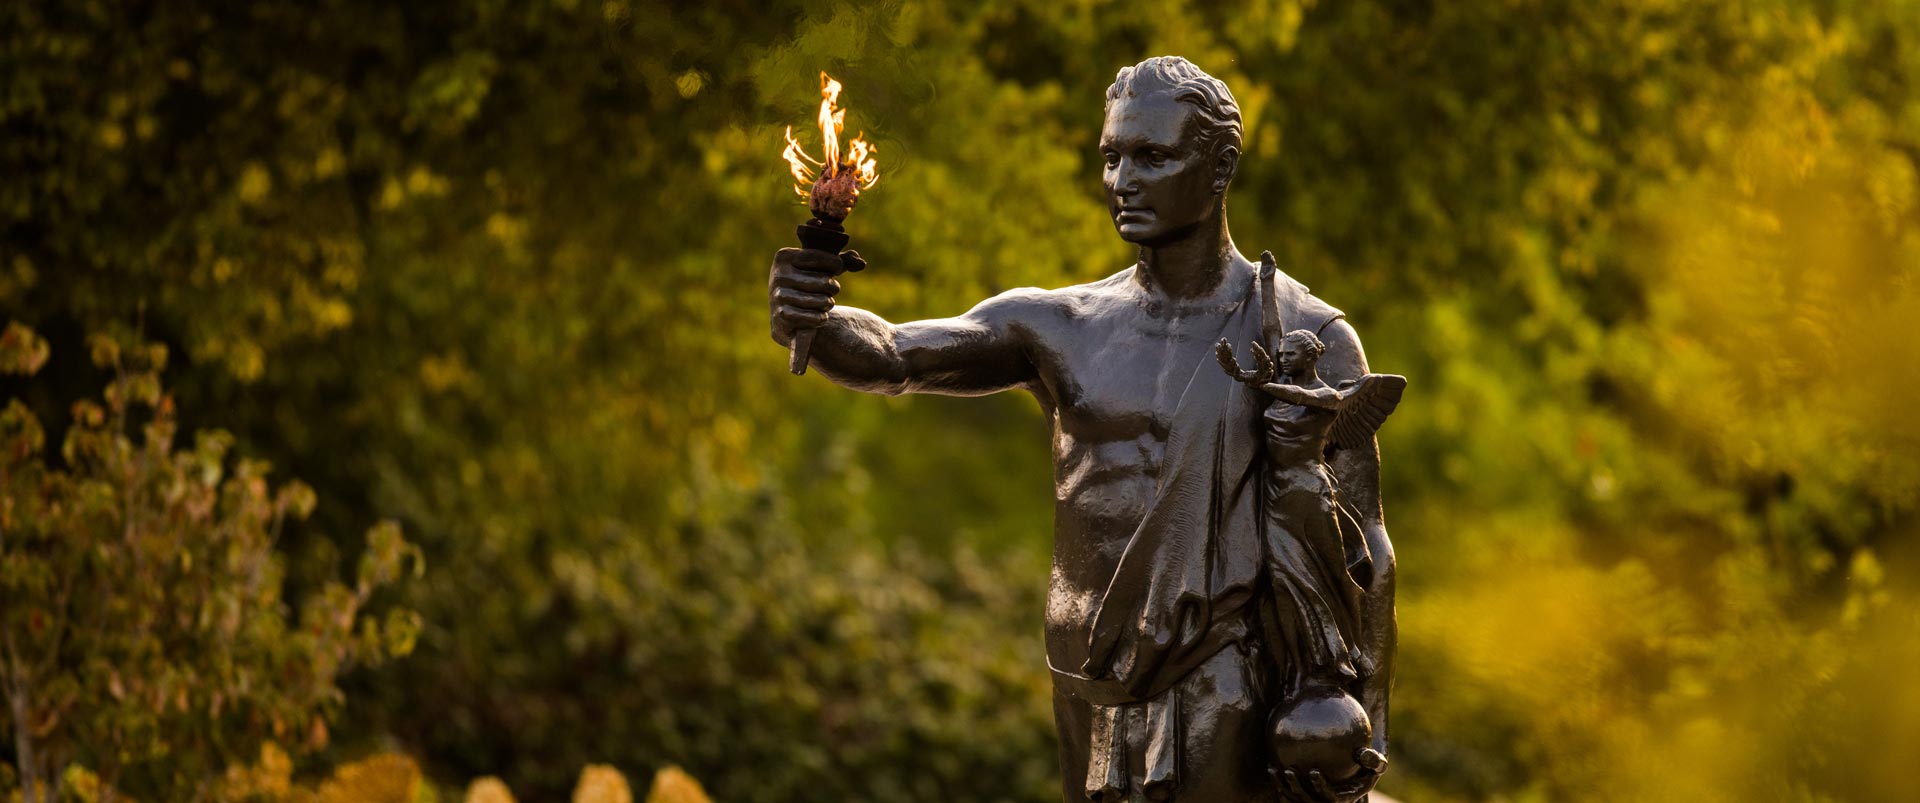 The Torchbearer statue in Circle Park at the University of Tennessee, Knoxville campus.